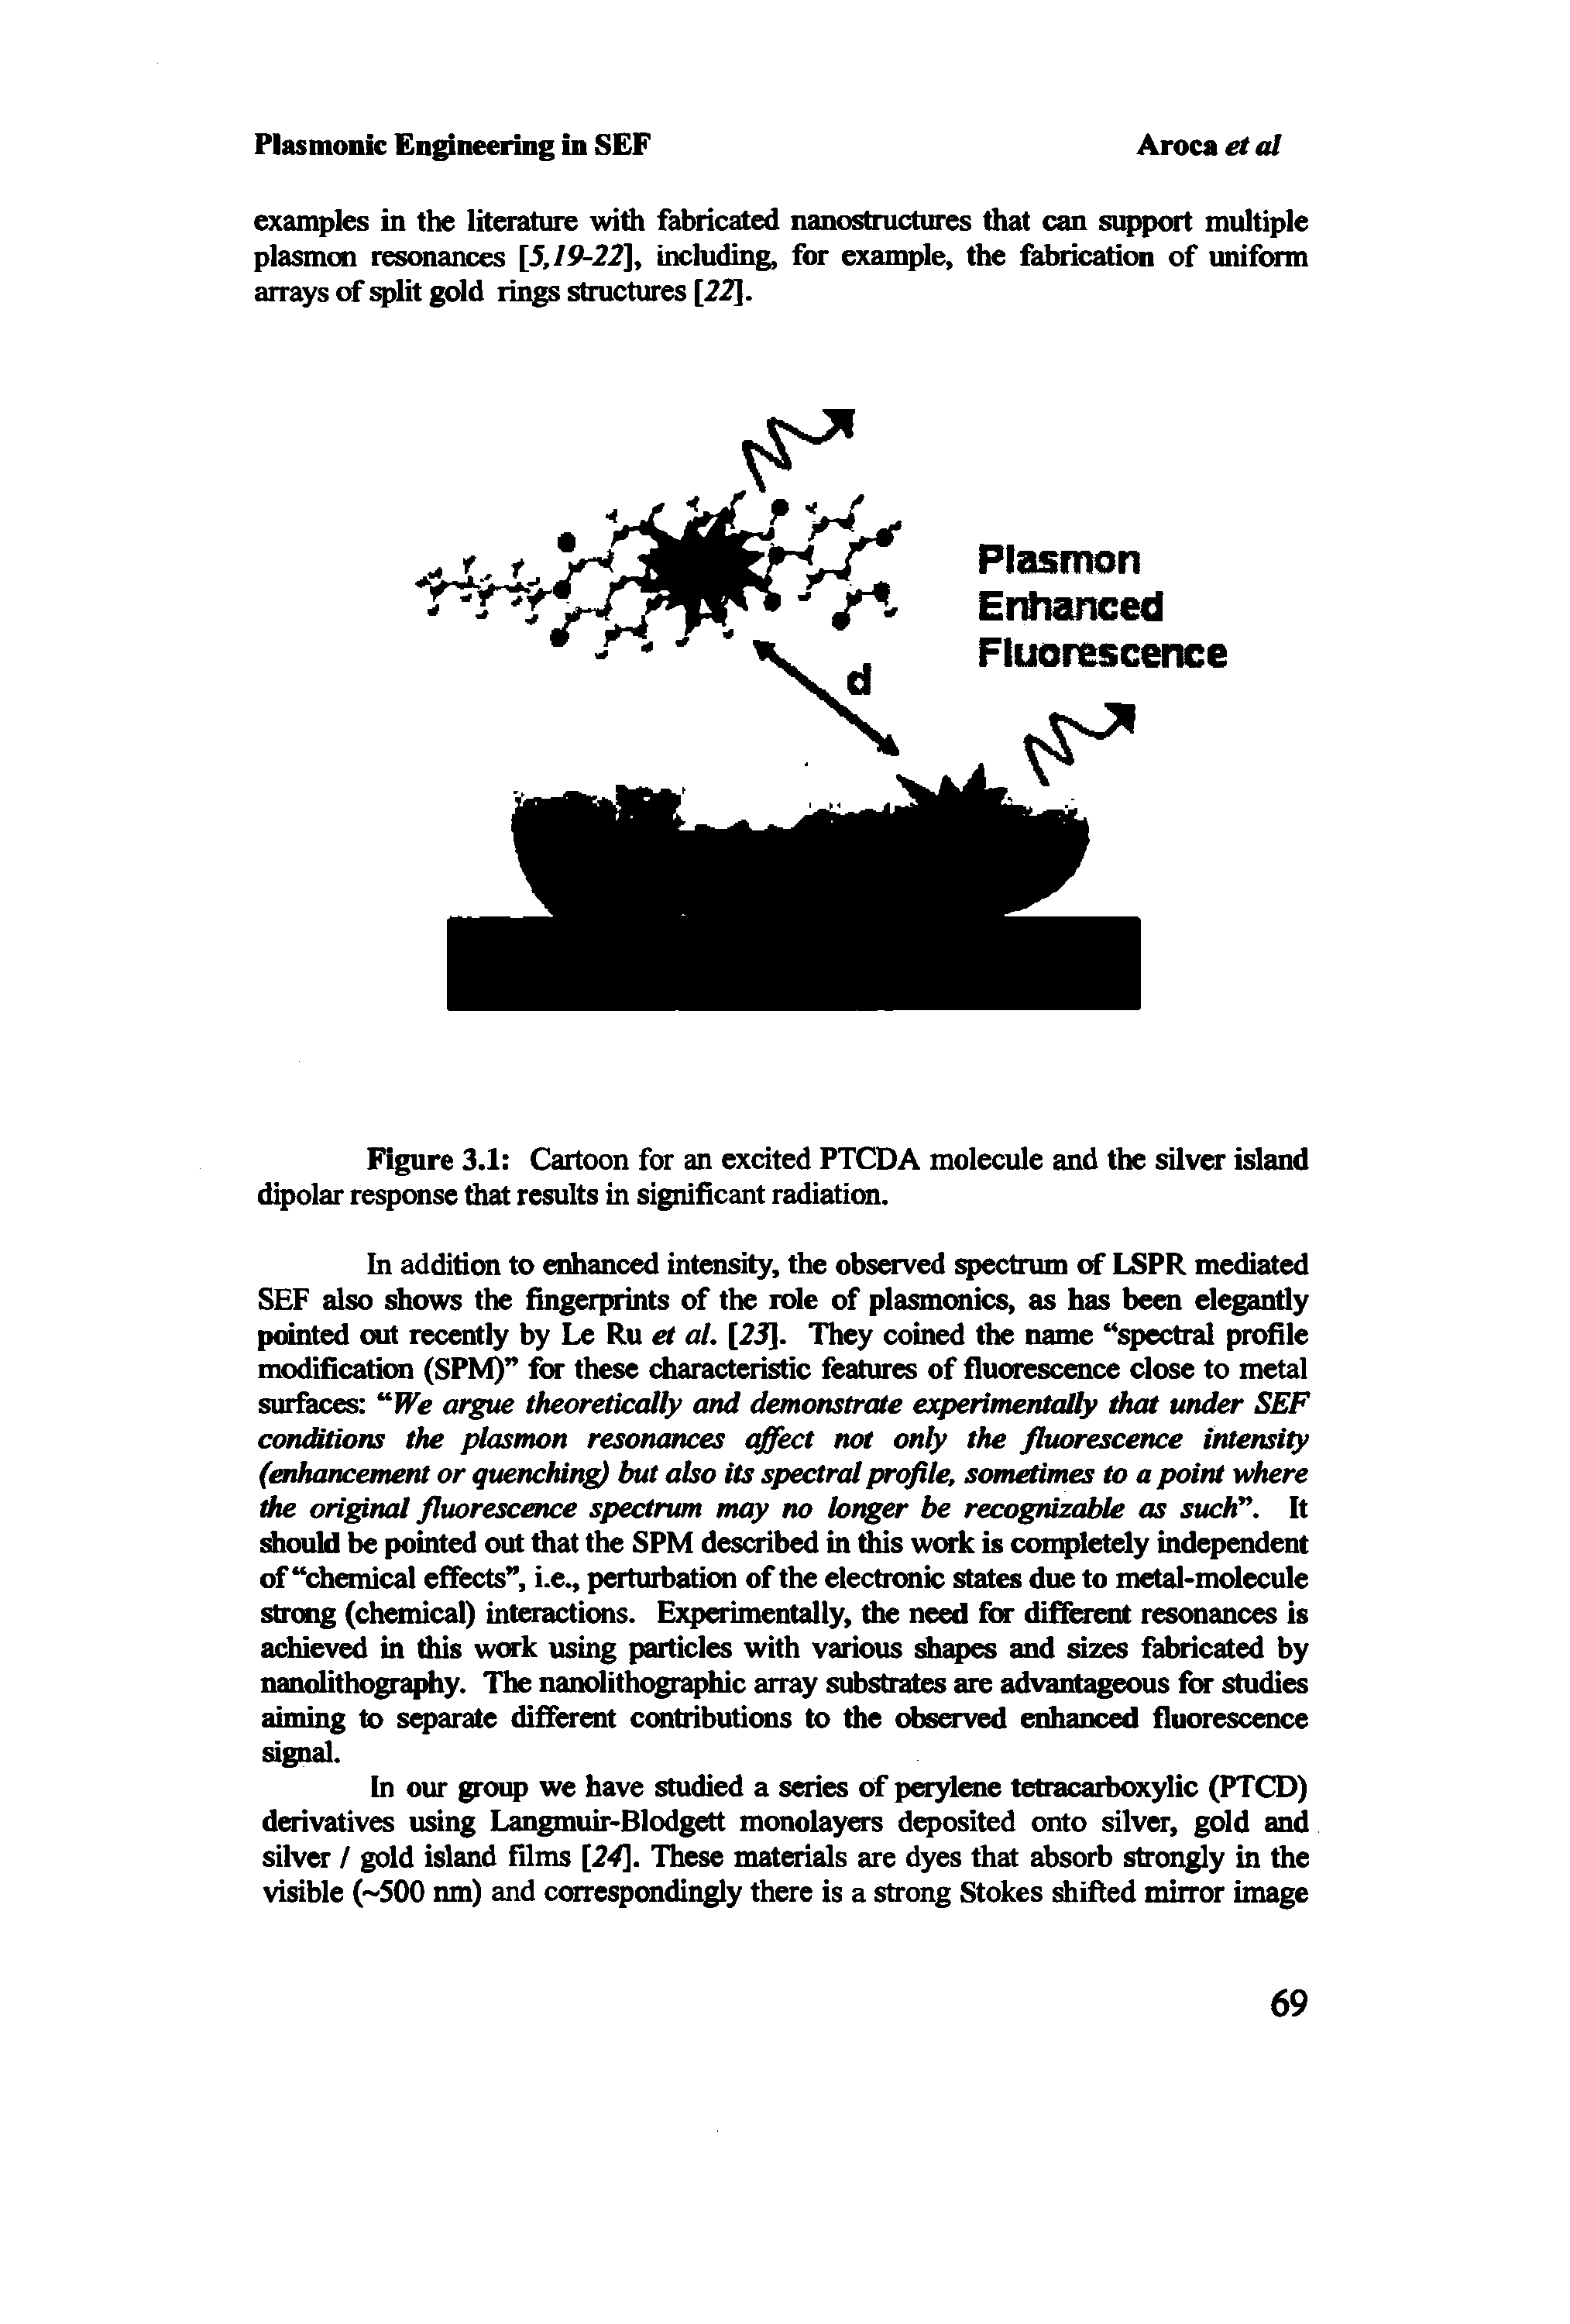 Figure 3.1 Cartoon for an excited PTCDA molecule and the silver island dipolar response that results in significant radiation.